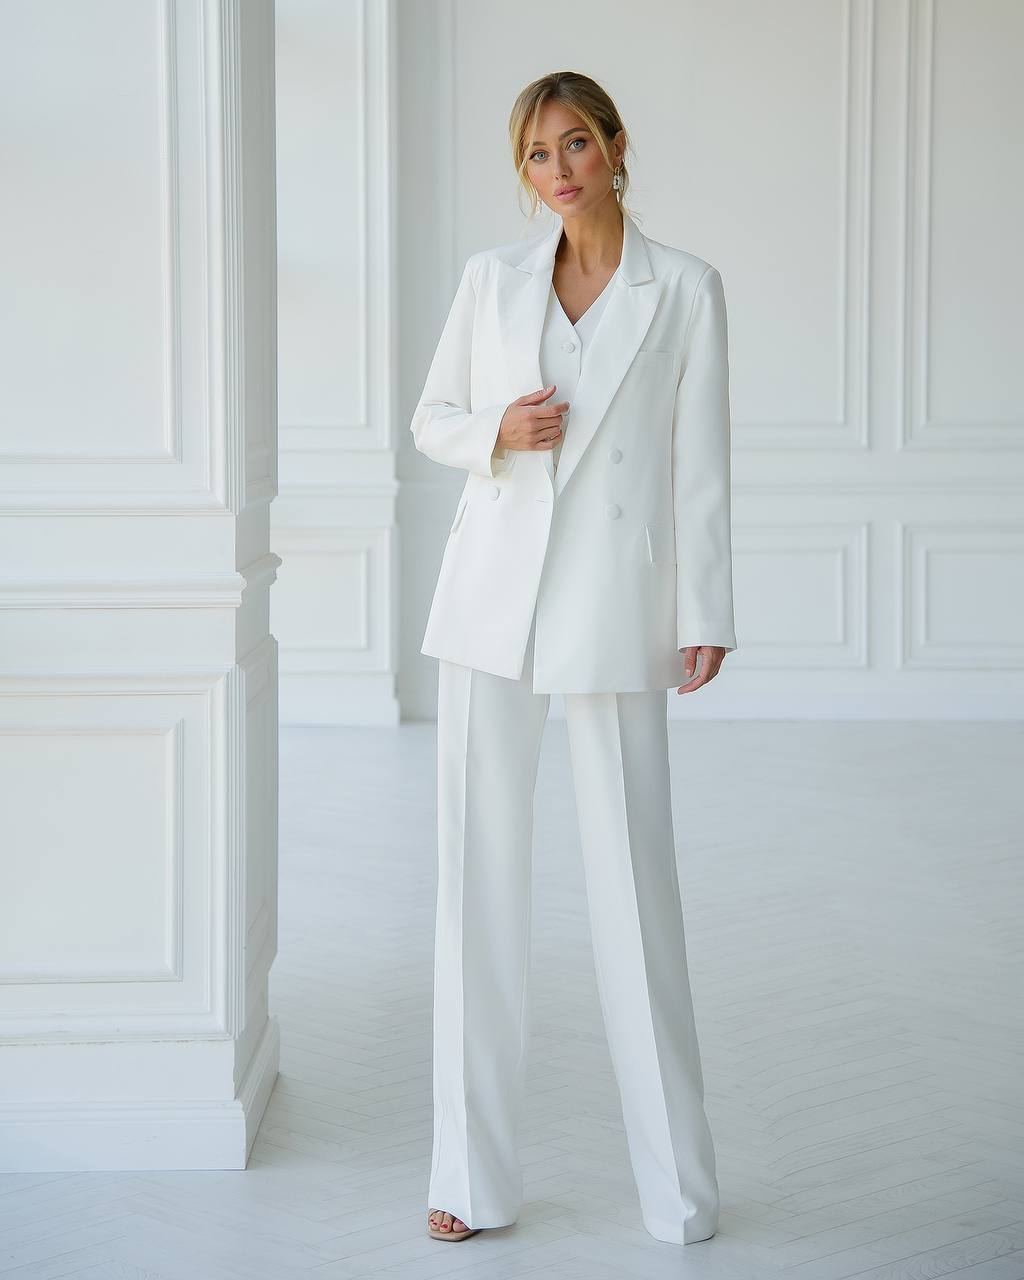 a woman in a white suit standing in a room